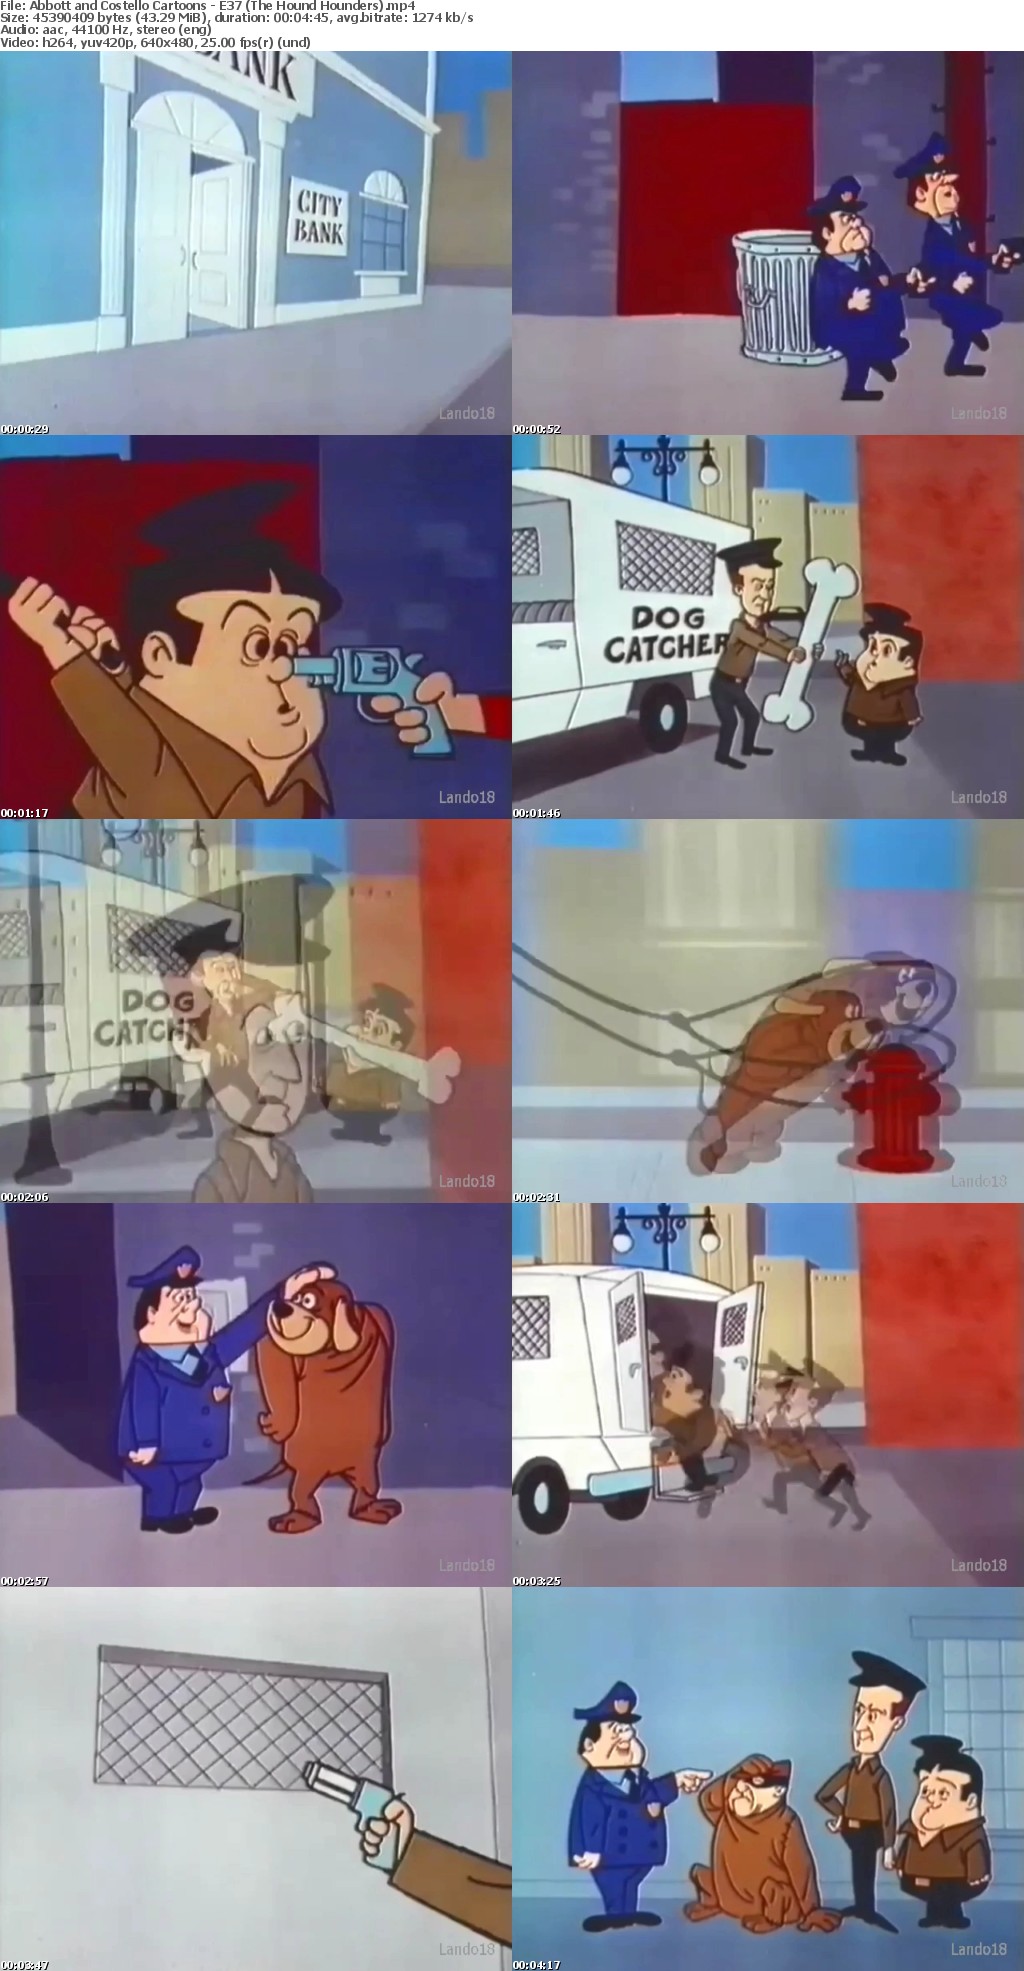 Abbott and Costello Cartoons (Cartoon collection in MP4 format) Lando18